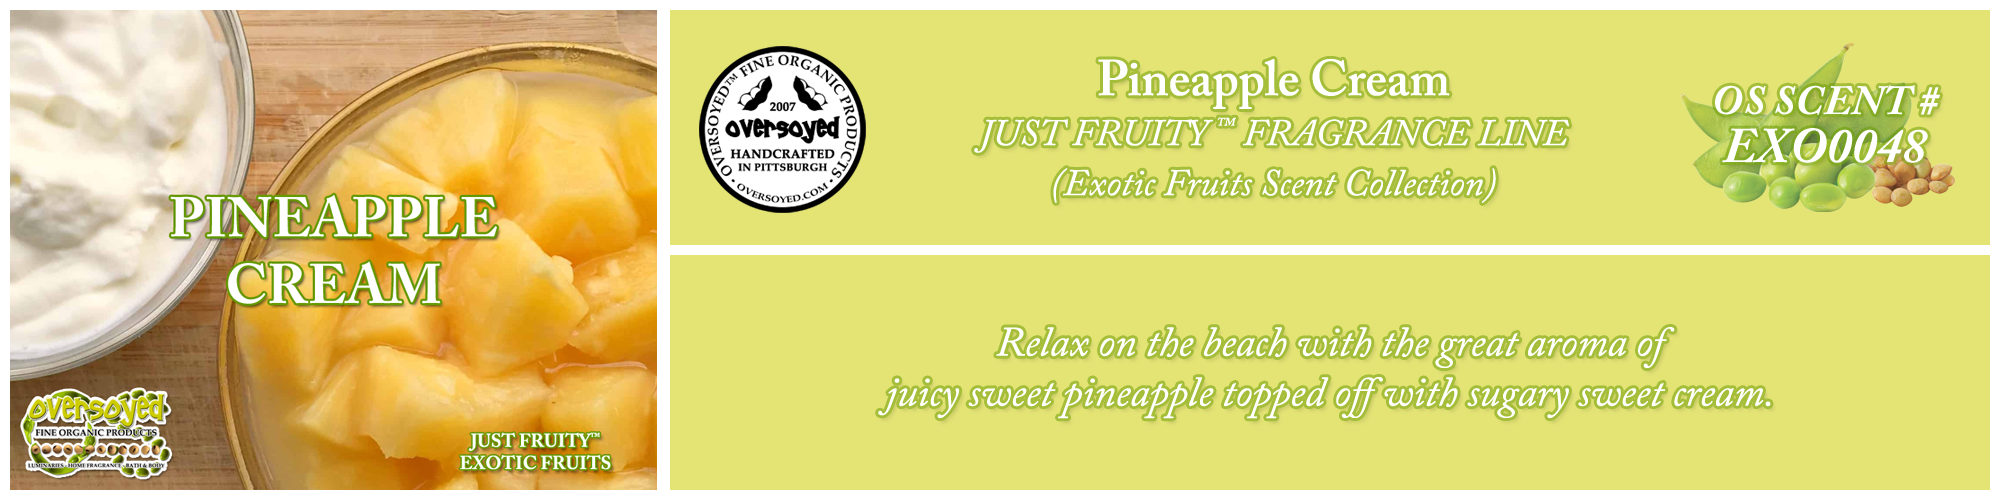 Pineapple Cream Handcrafted Products Collection